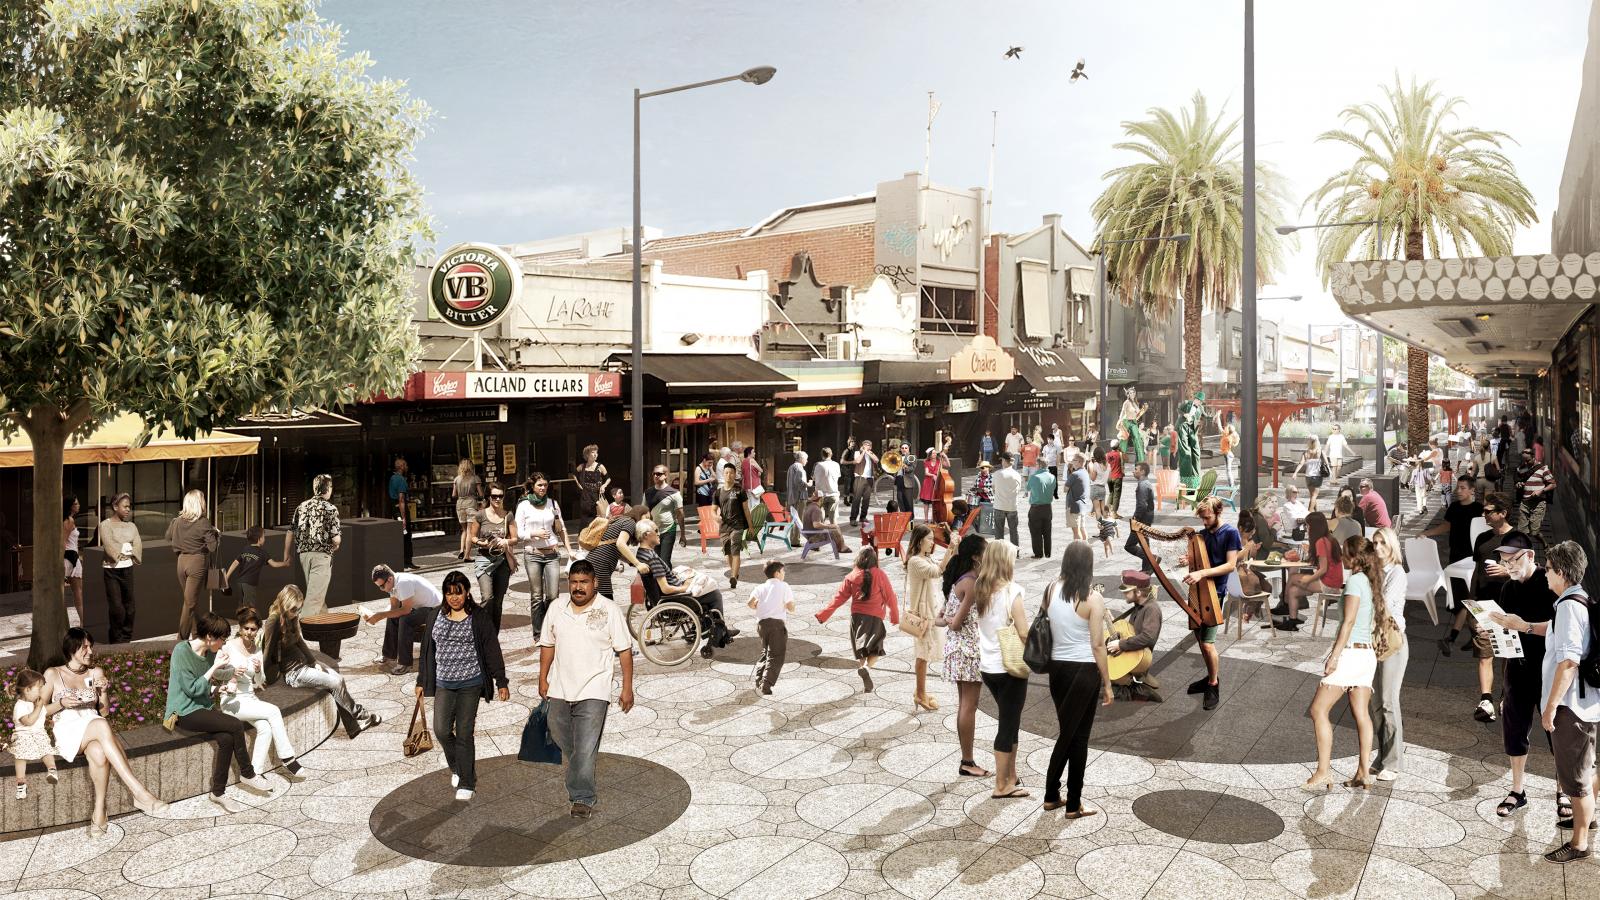 A lively street scene featuring numerous people engaging in various activities on Acland Street. Some are walking, while others sit on benches under trees. Shops and cafes line the street with visible signs. The sunny setting of St Kilda features palm trees and street lamps.